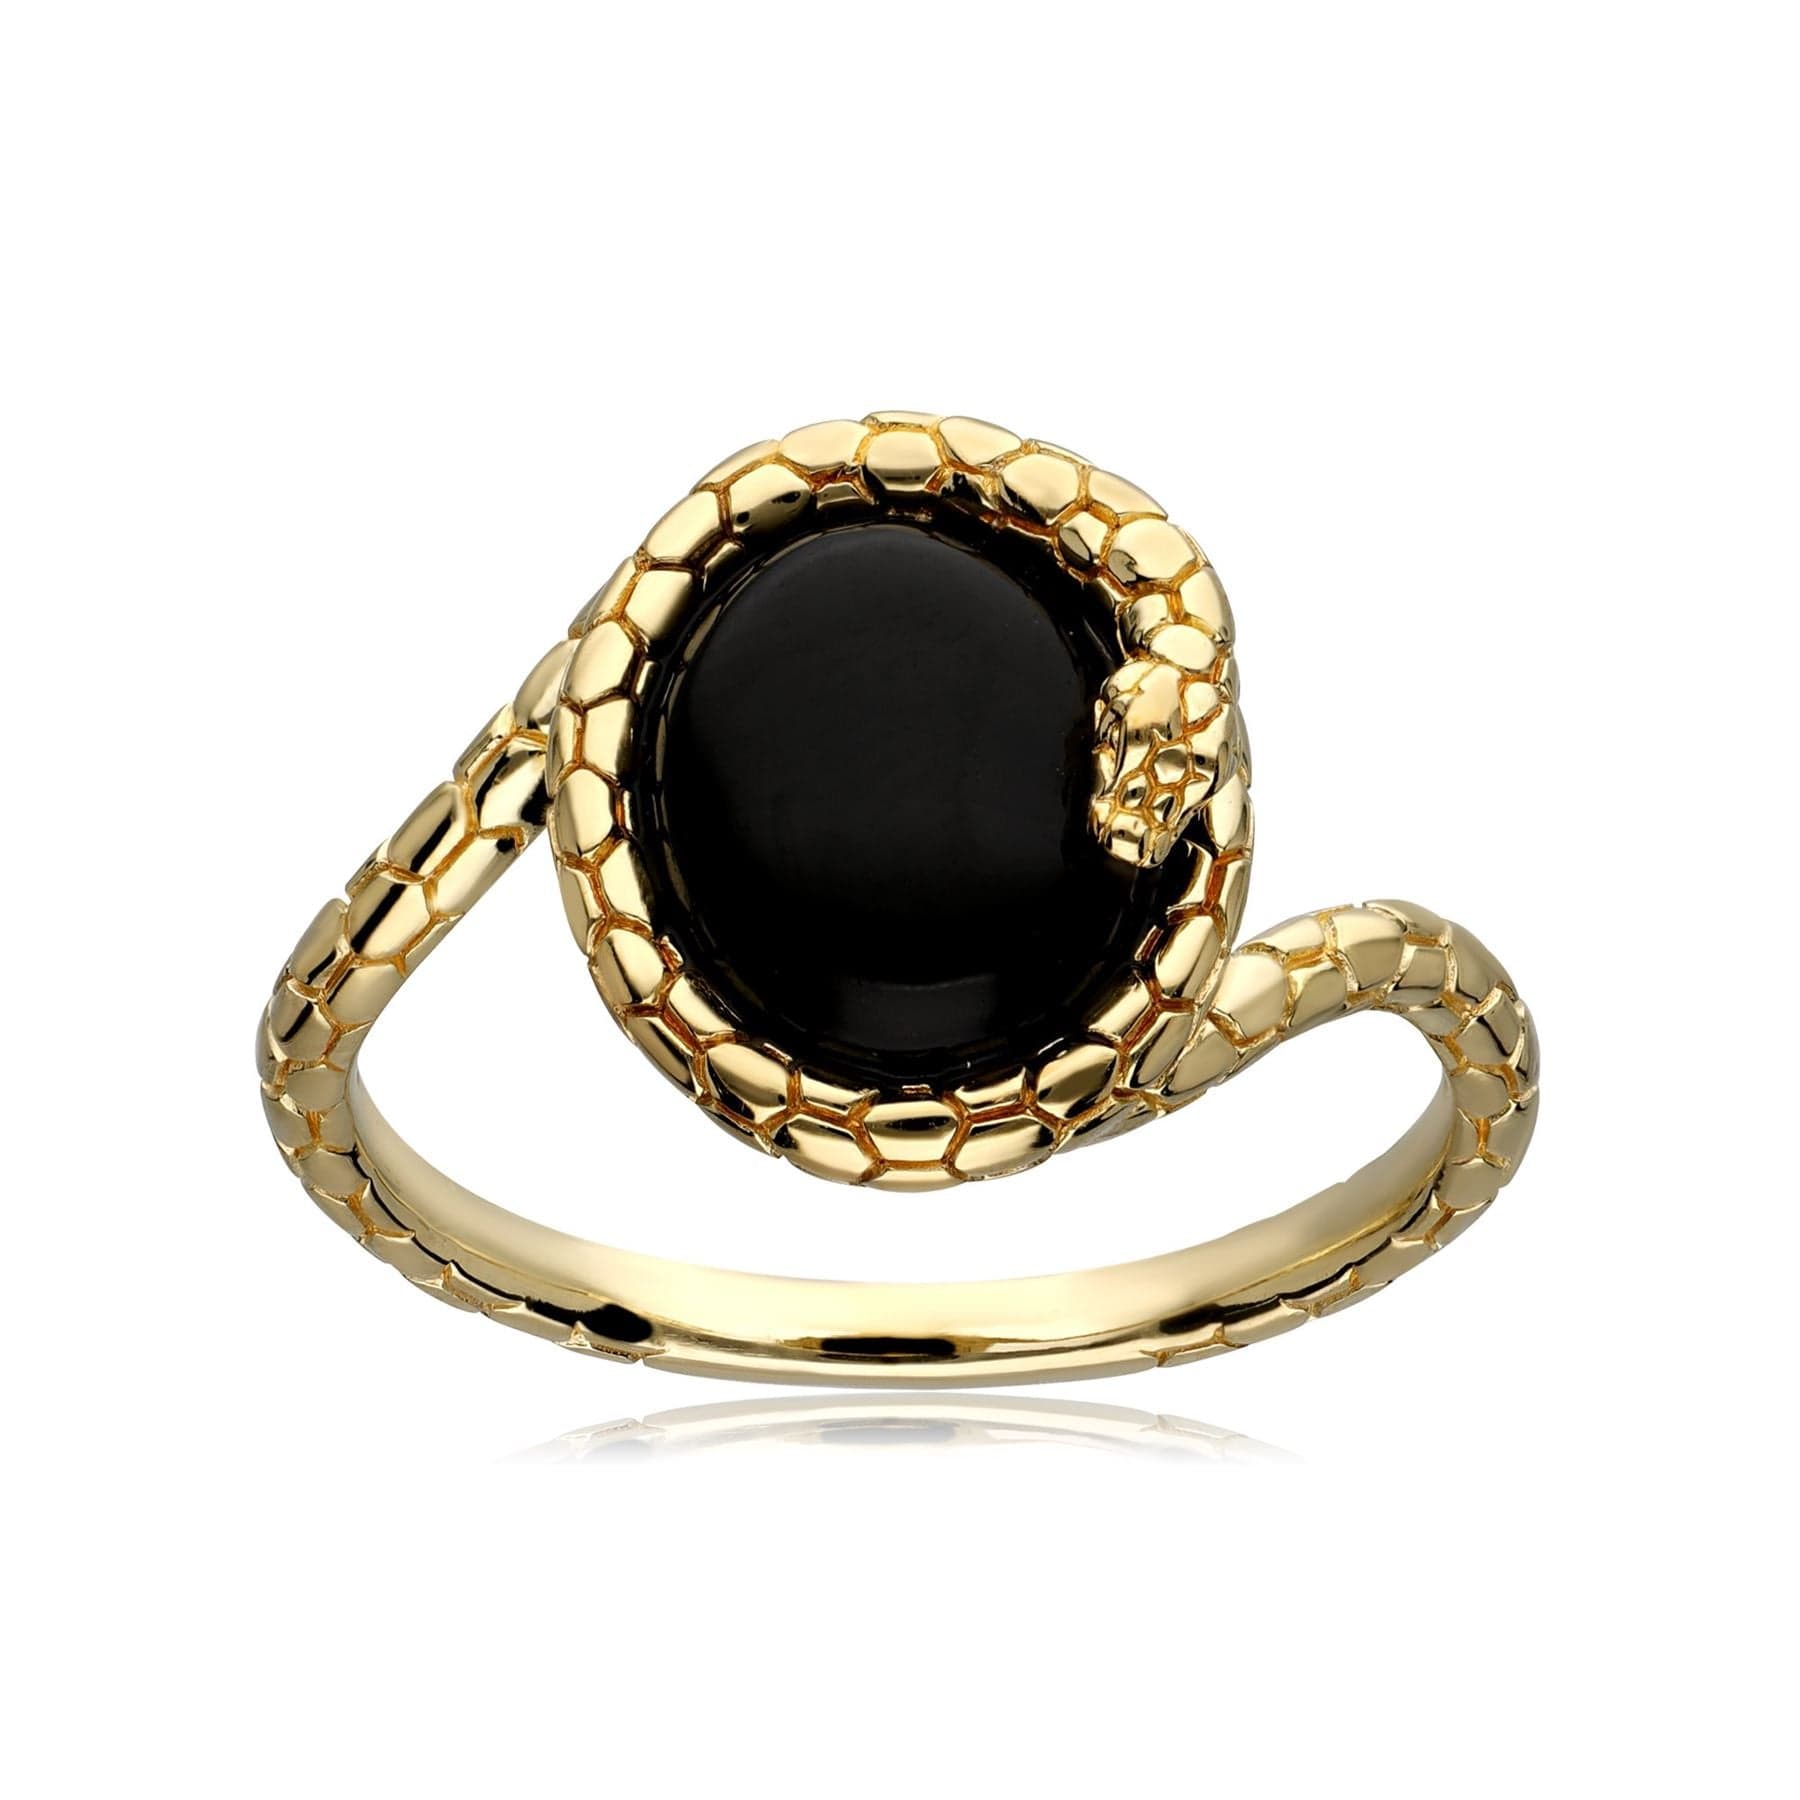 ECFEW™ 'The Ruler' Onyx Winding Snake Ring in 18ct Gold Plated Sterling Silver